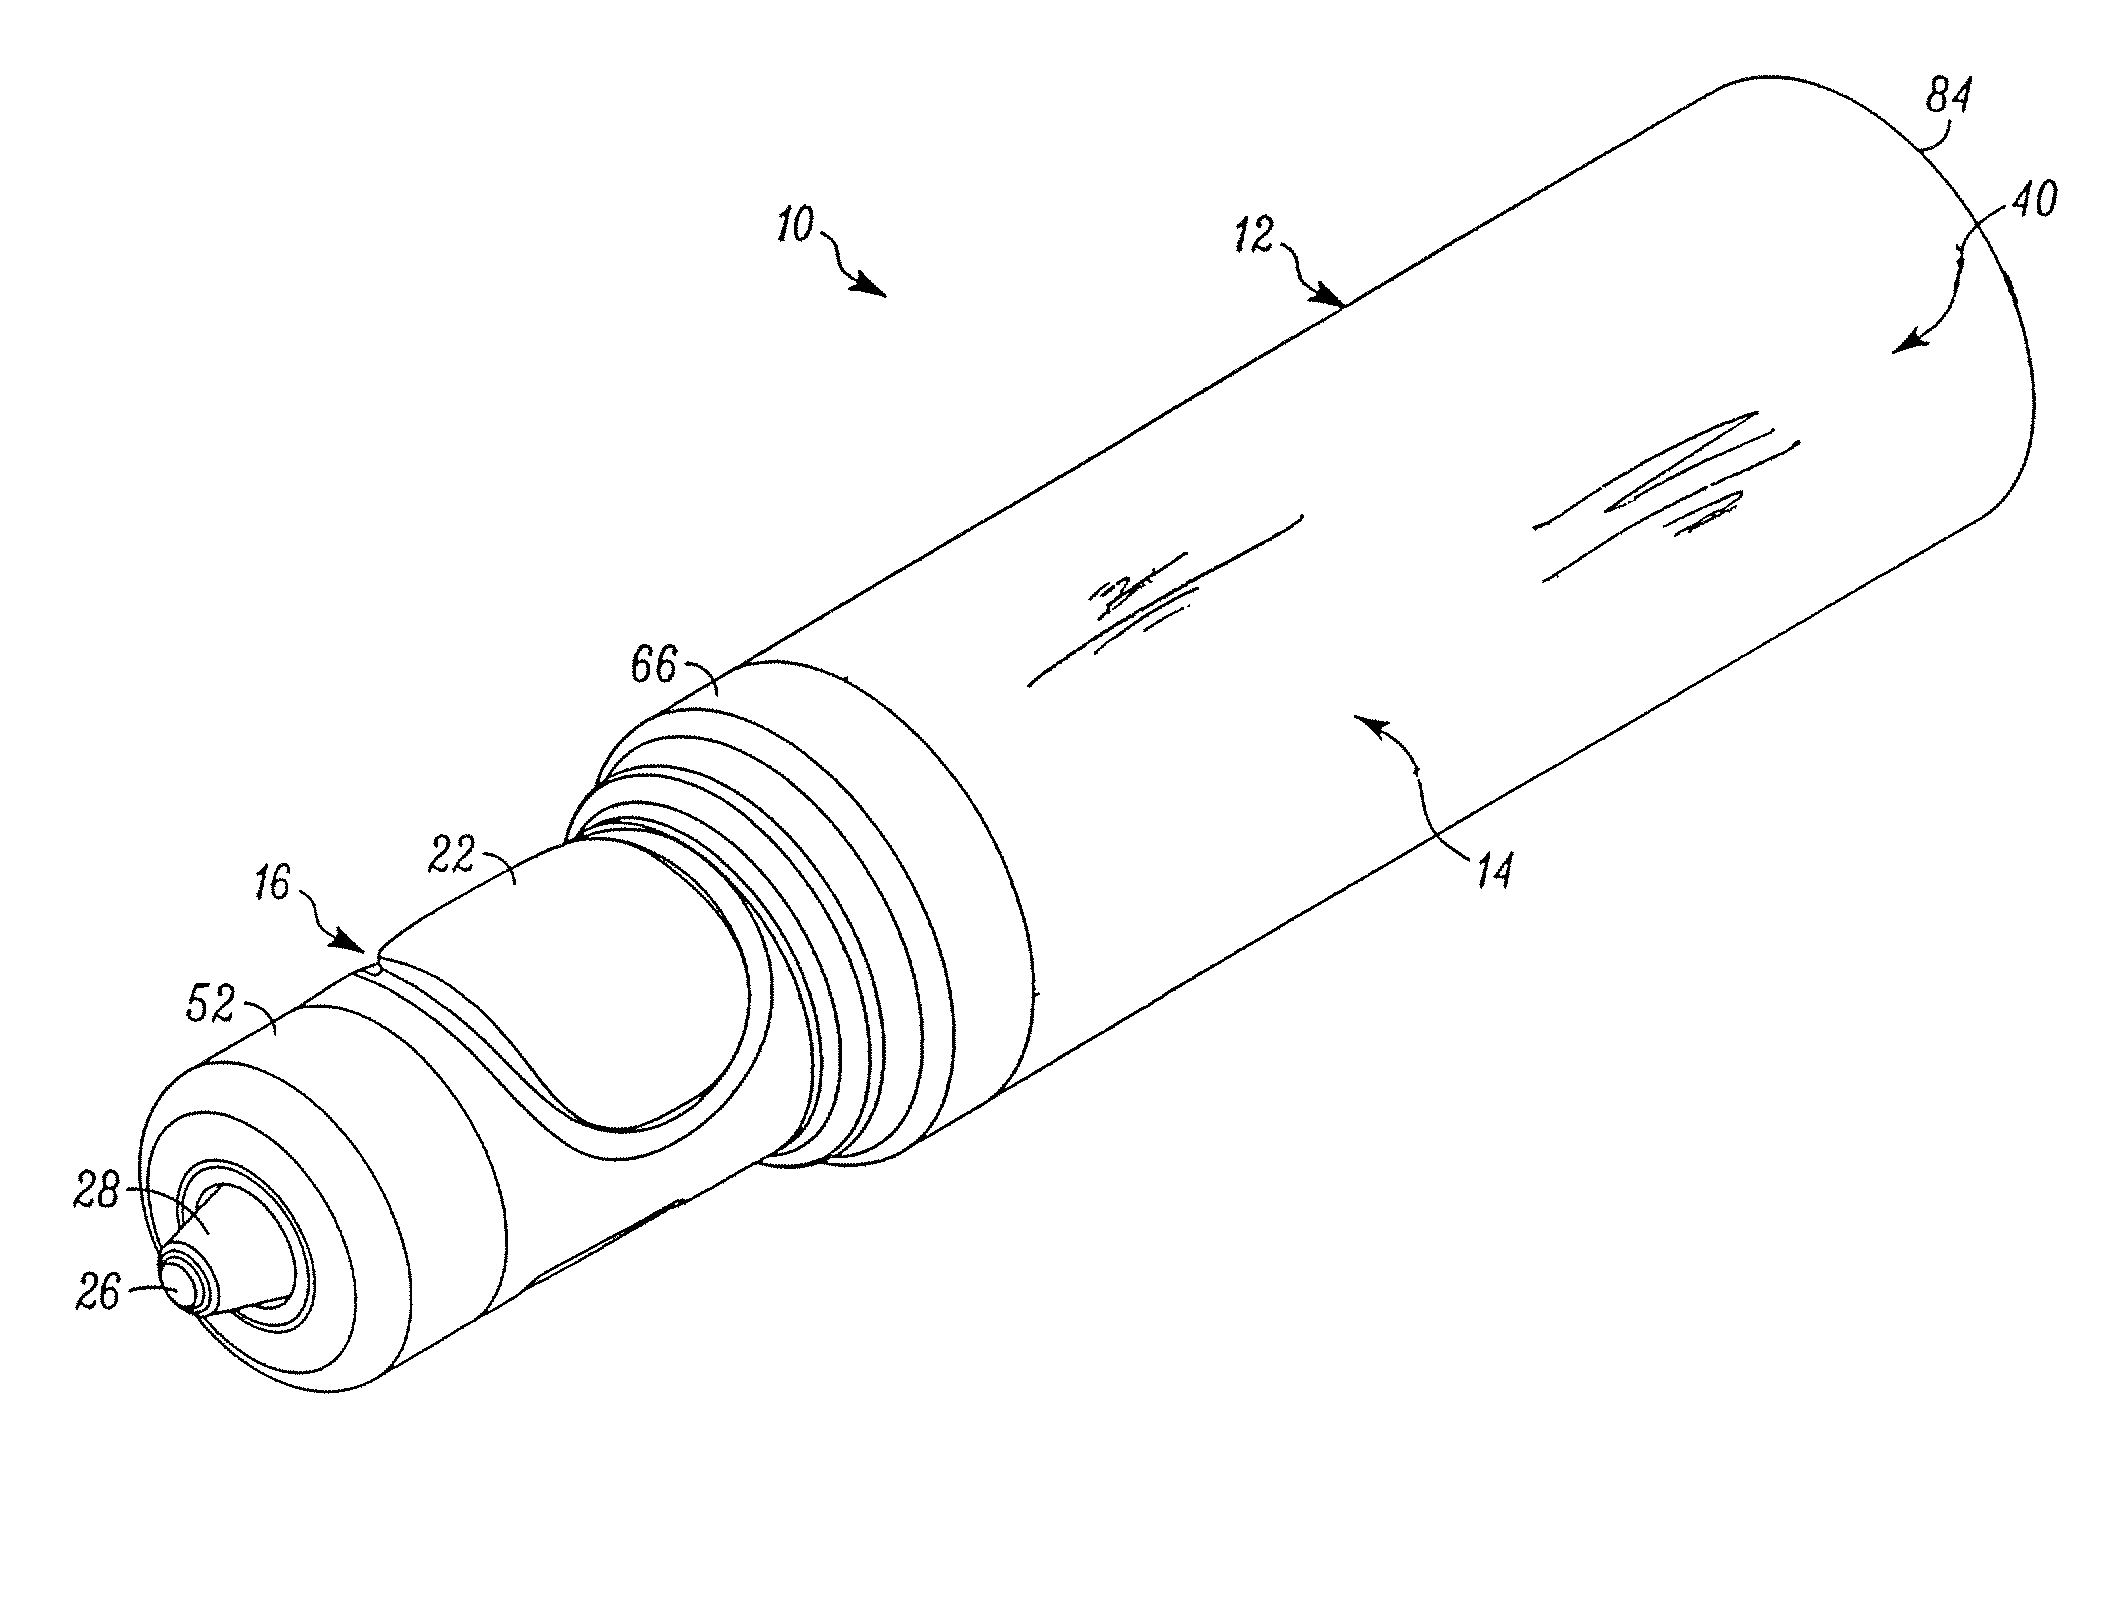 Multiple dose delivery device with manually depressible actuator and one-way valve for storing and dispensing substances, and related method